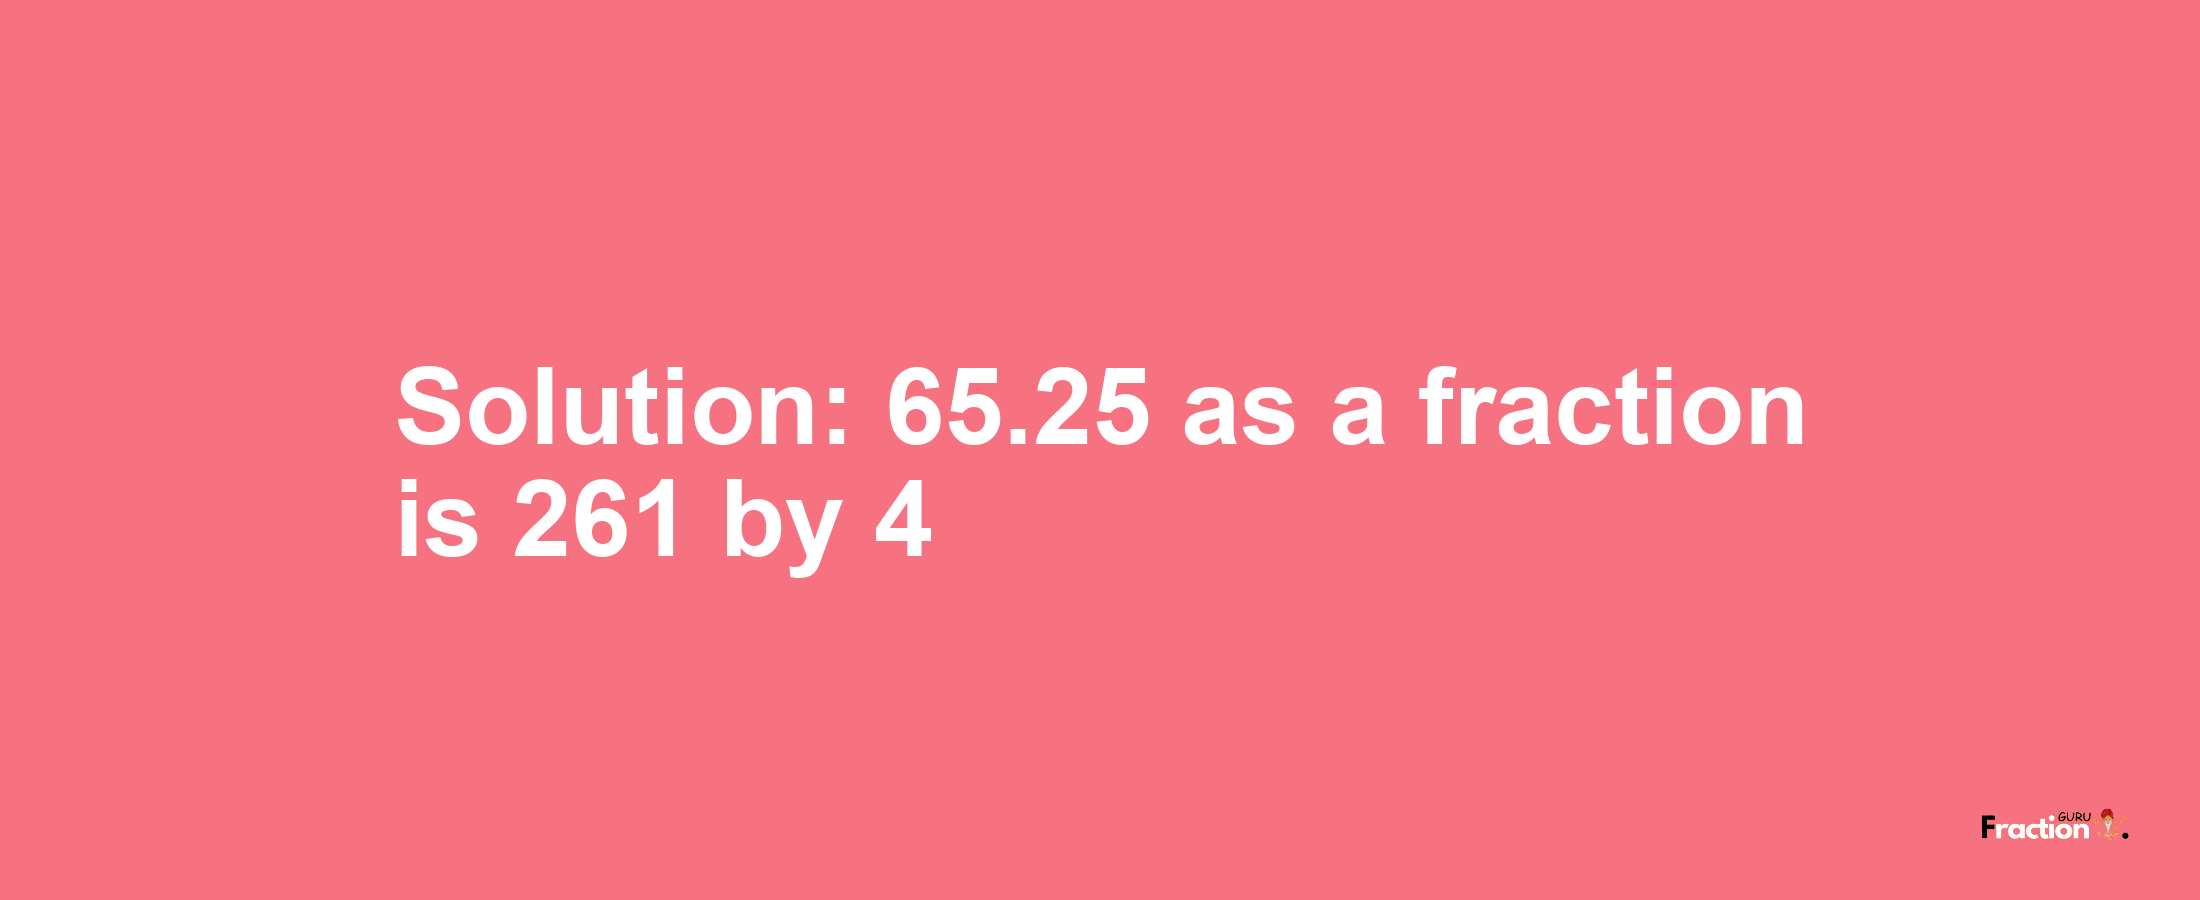 Solution:65.25 as a fraction is 261/4